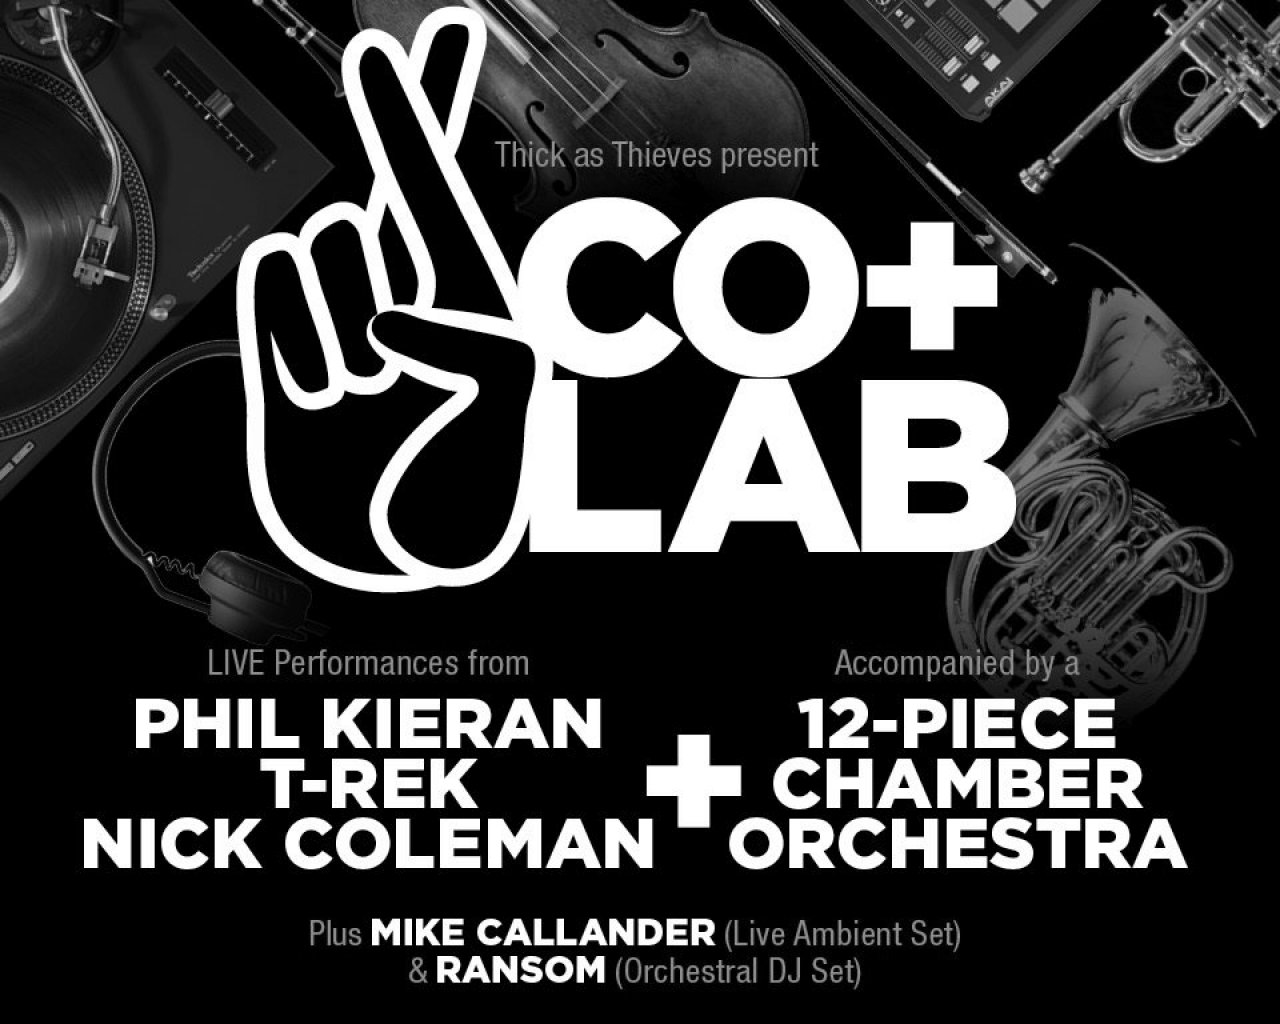 Thick As Thieves present Co Lab.